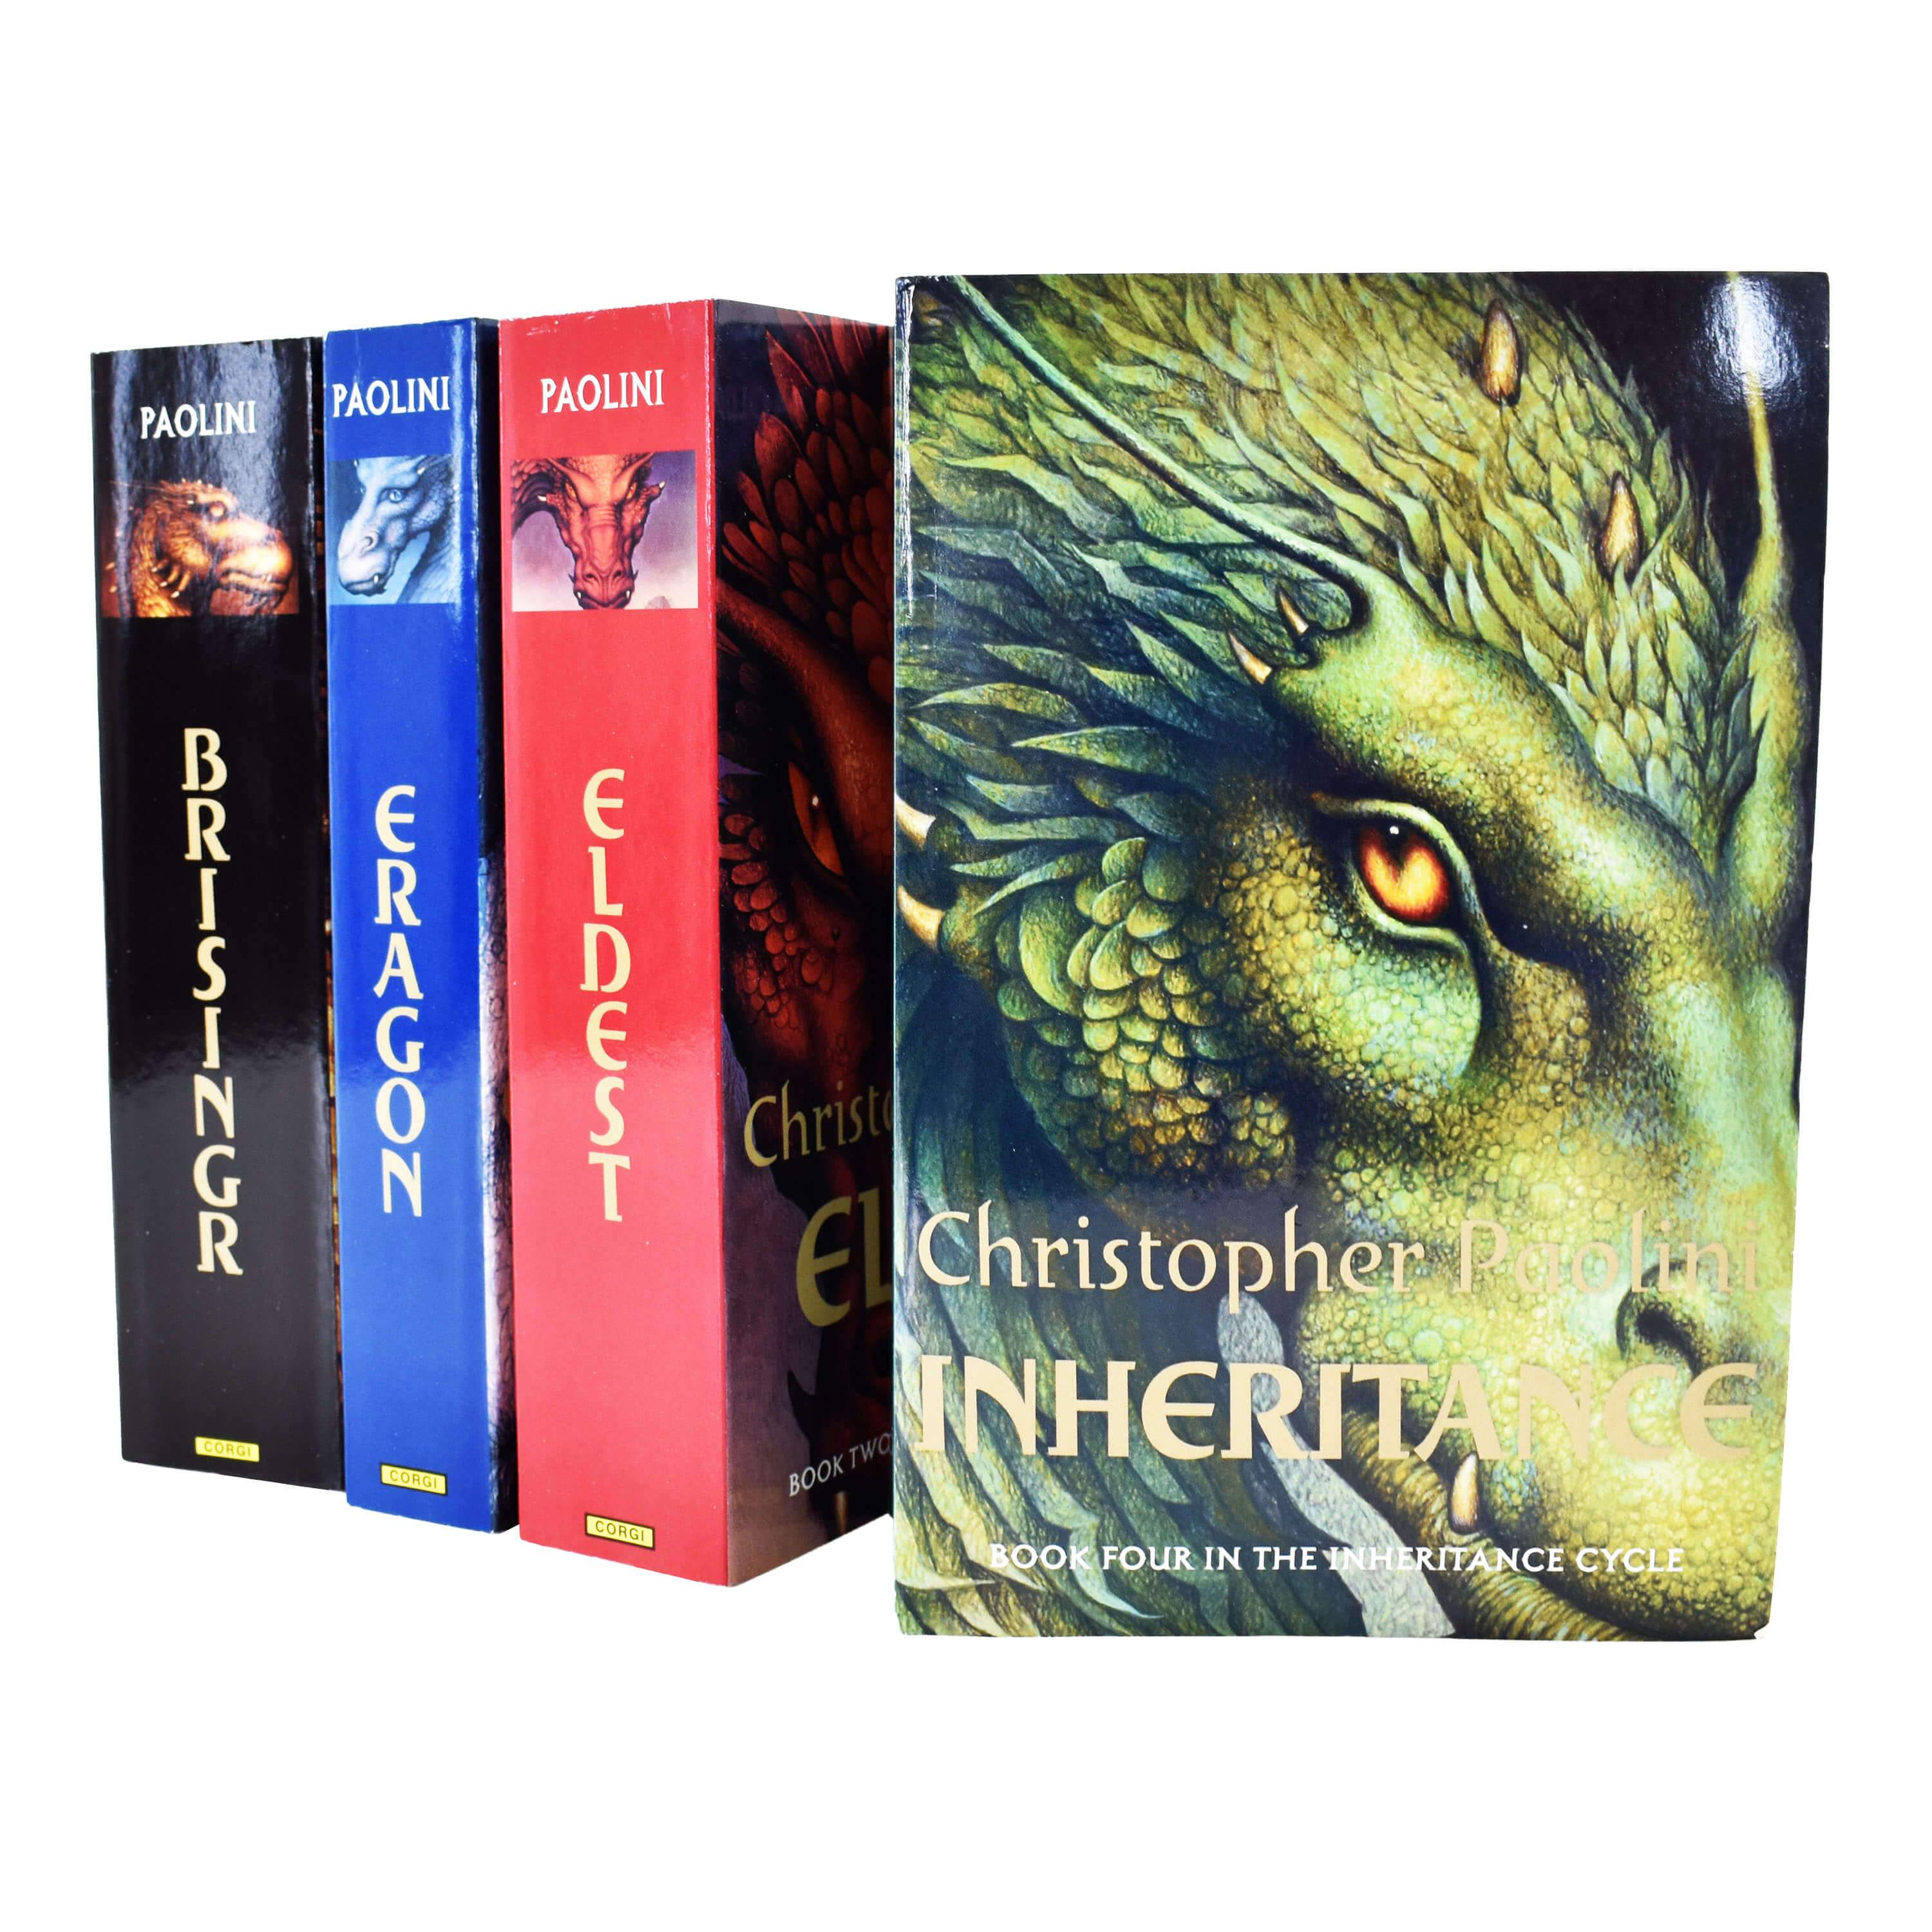 Books　Paolini　—　Inheritance　14-1　Age　Books2Door　Cycle　Christopher　by　Collection